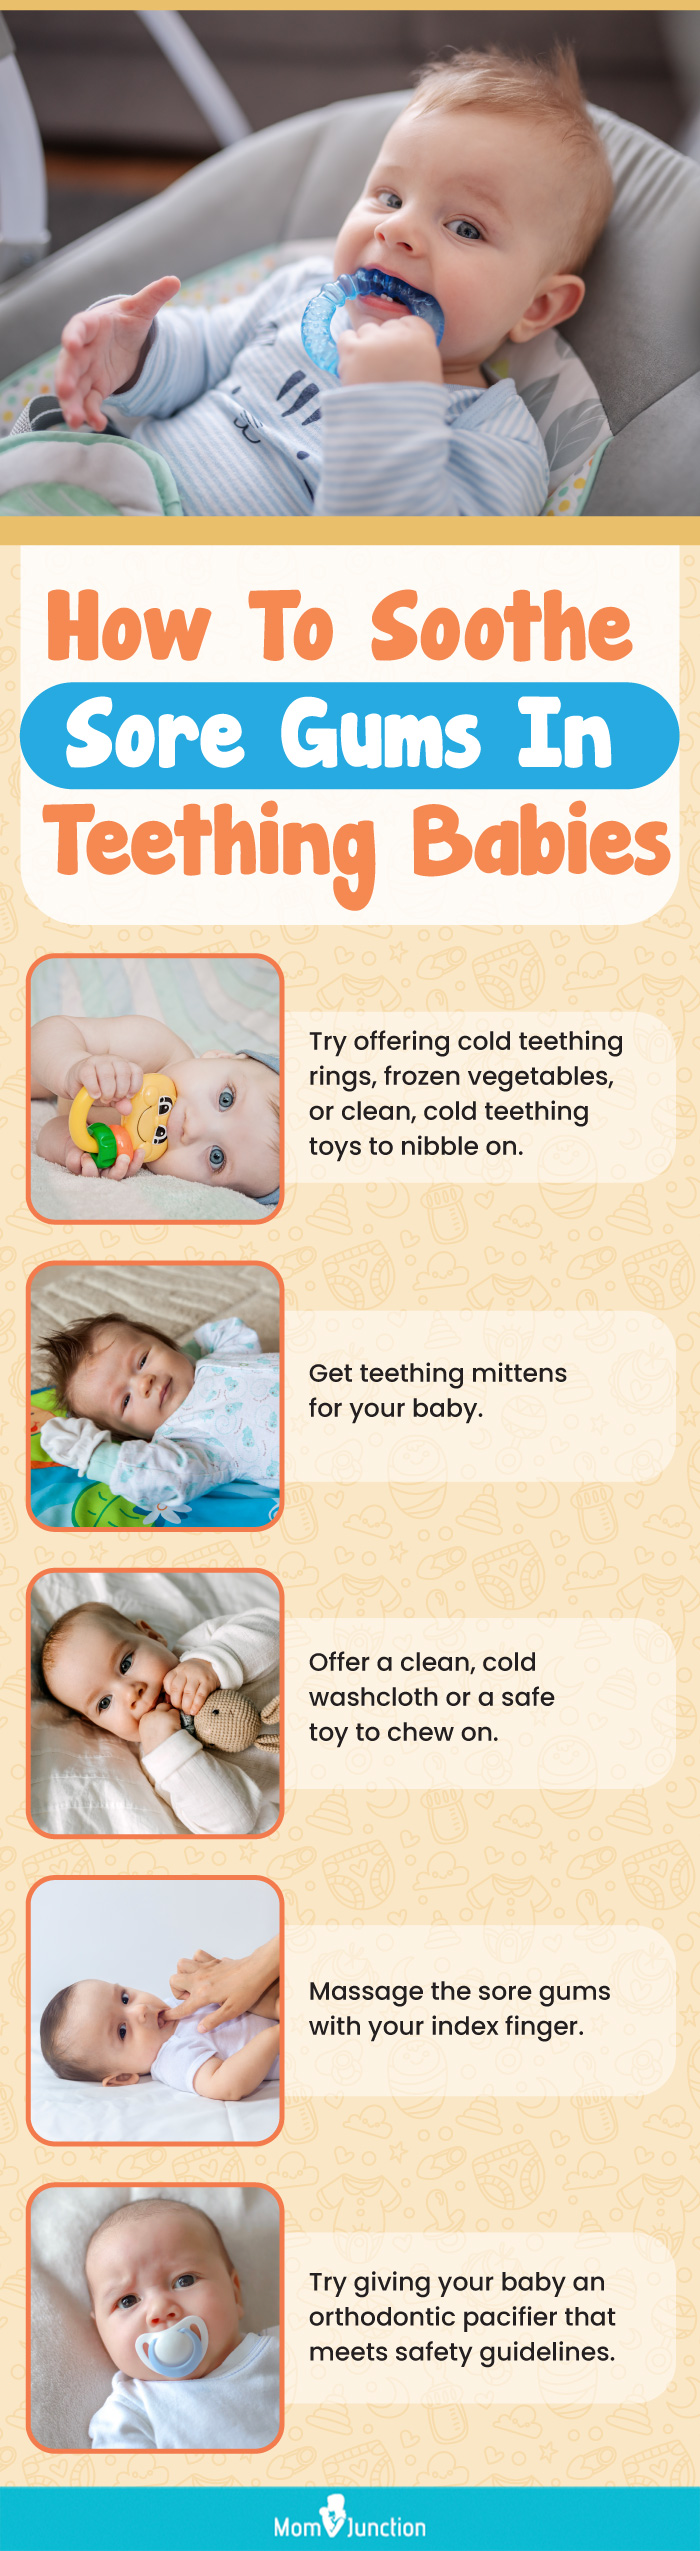 how to soothe sore gums in teething babies (infographic)